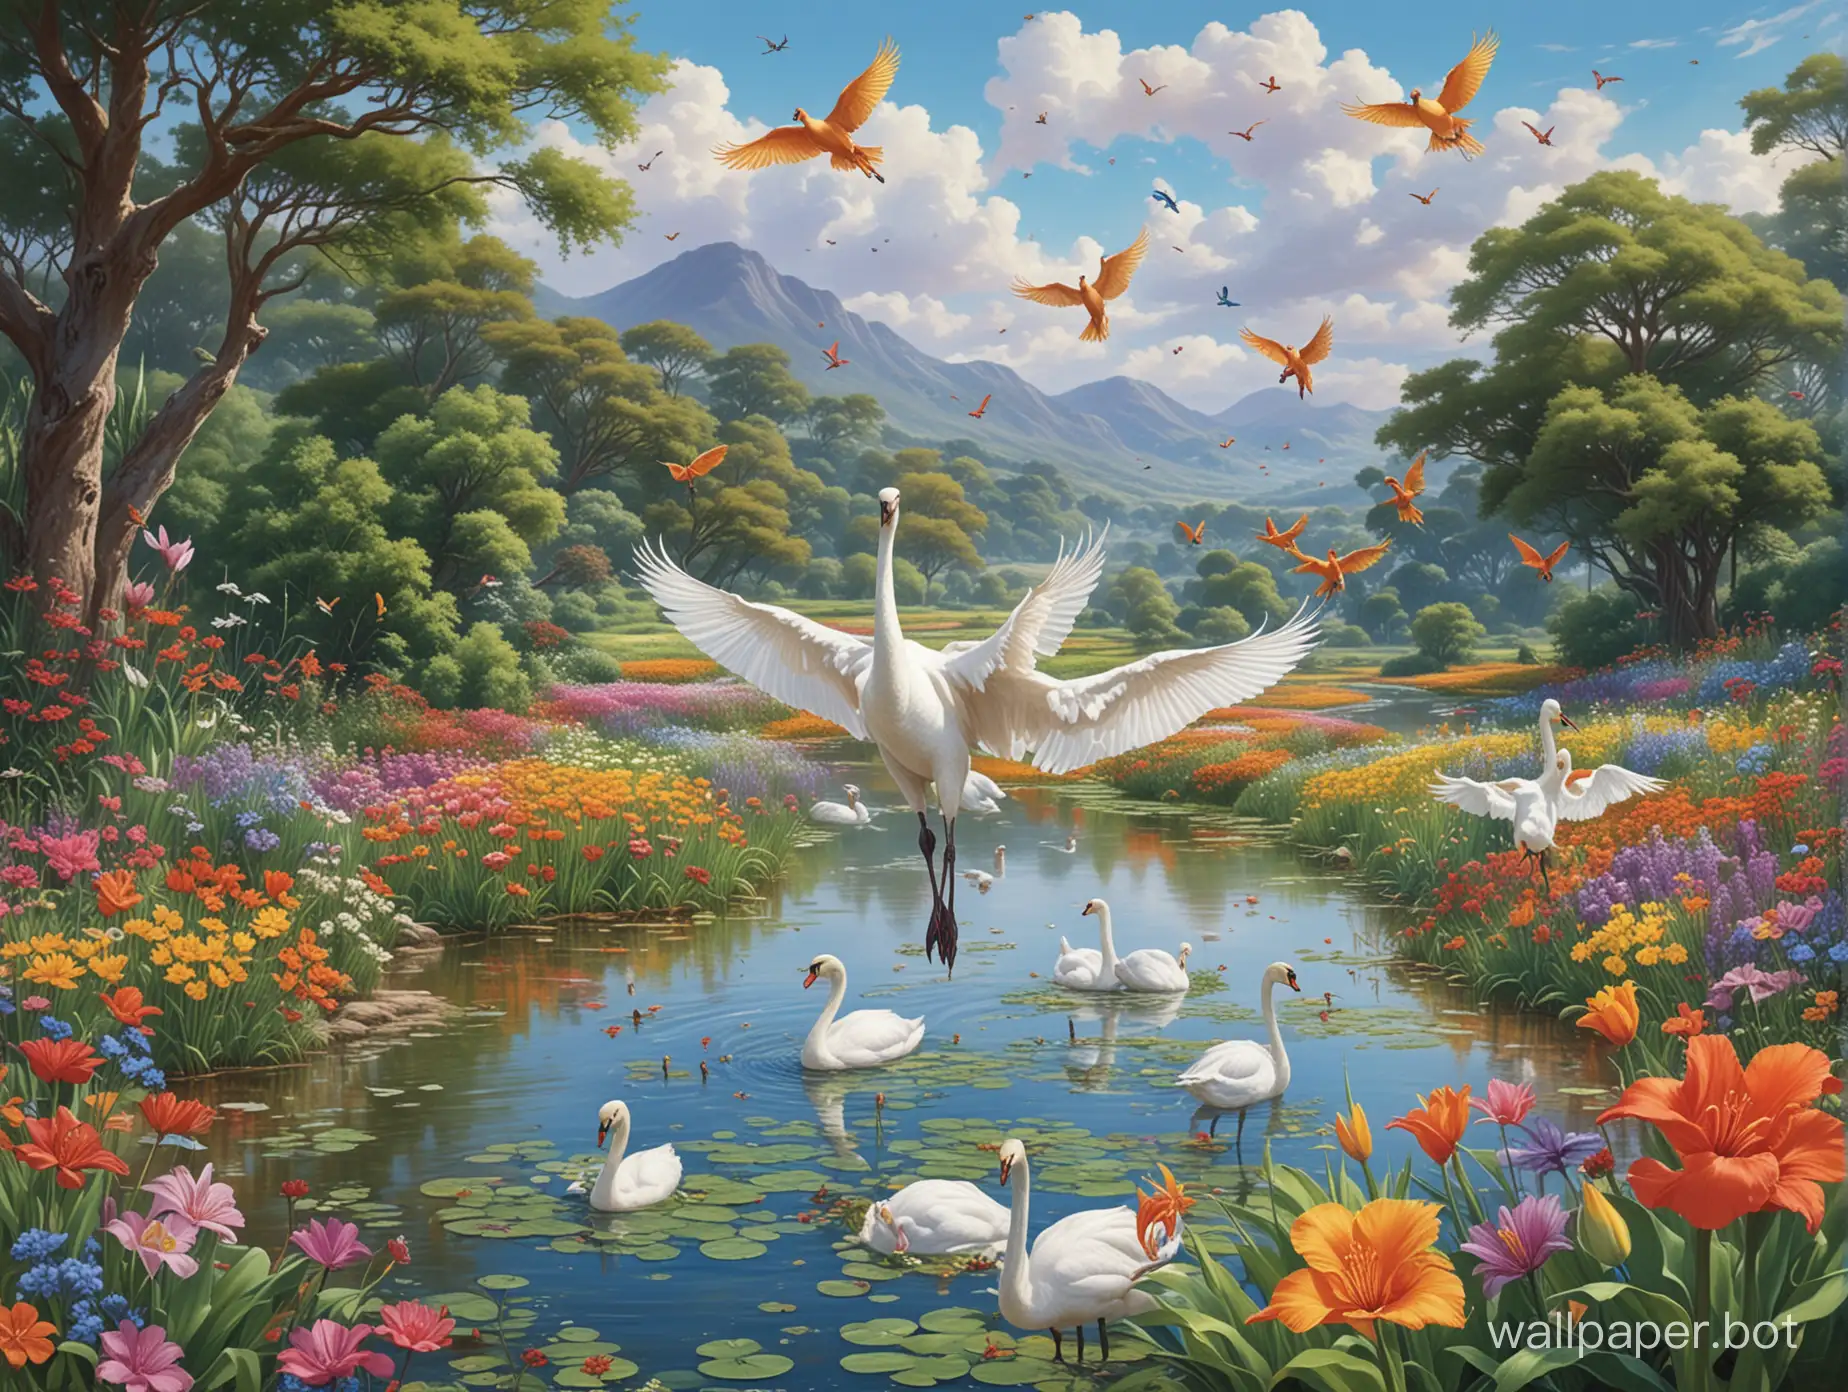 Vibrant-Summer-Sky-RainbowColored-Swans-Soar-Over-Lush-Savanna-with-Exotic-Wildlife-and-Floral-Delights